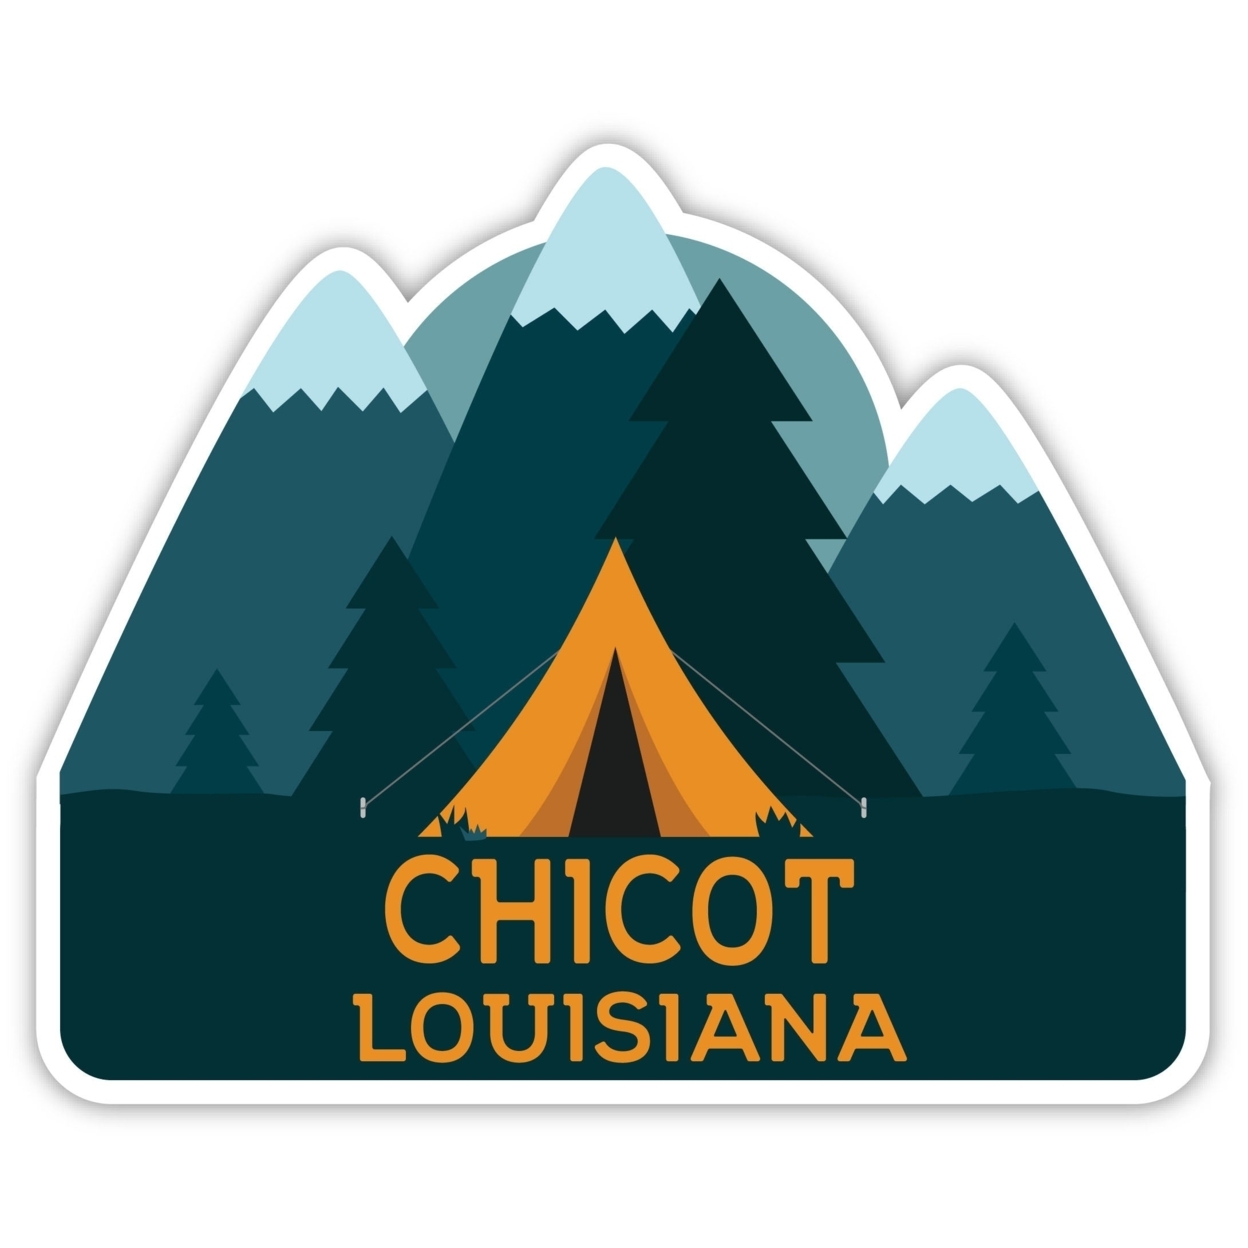 Chicot Louisiana Souvenir Decorative Stickers (Choose Theme And Size) - 4-Pack, 8-Inch, Tent